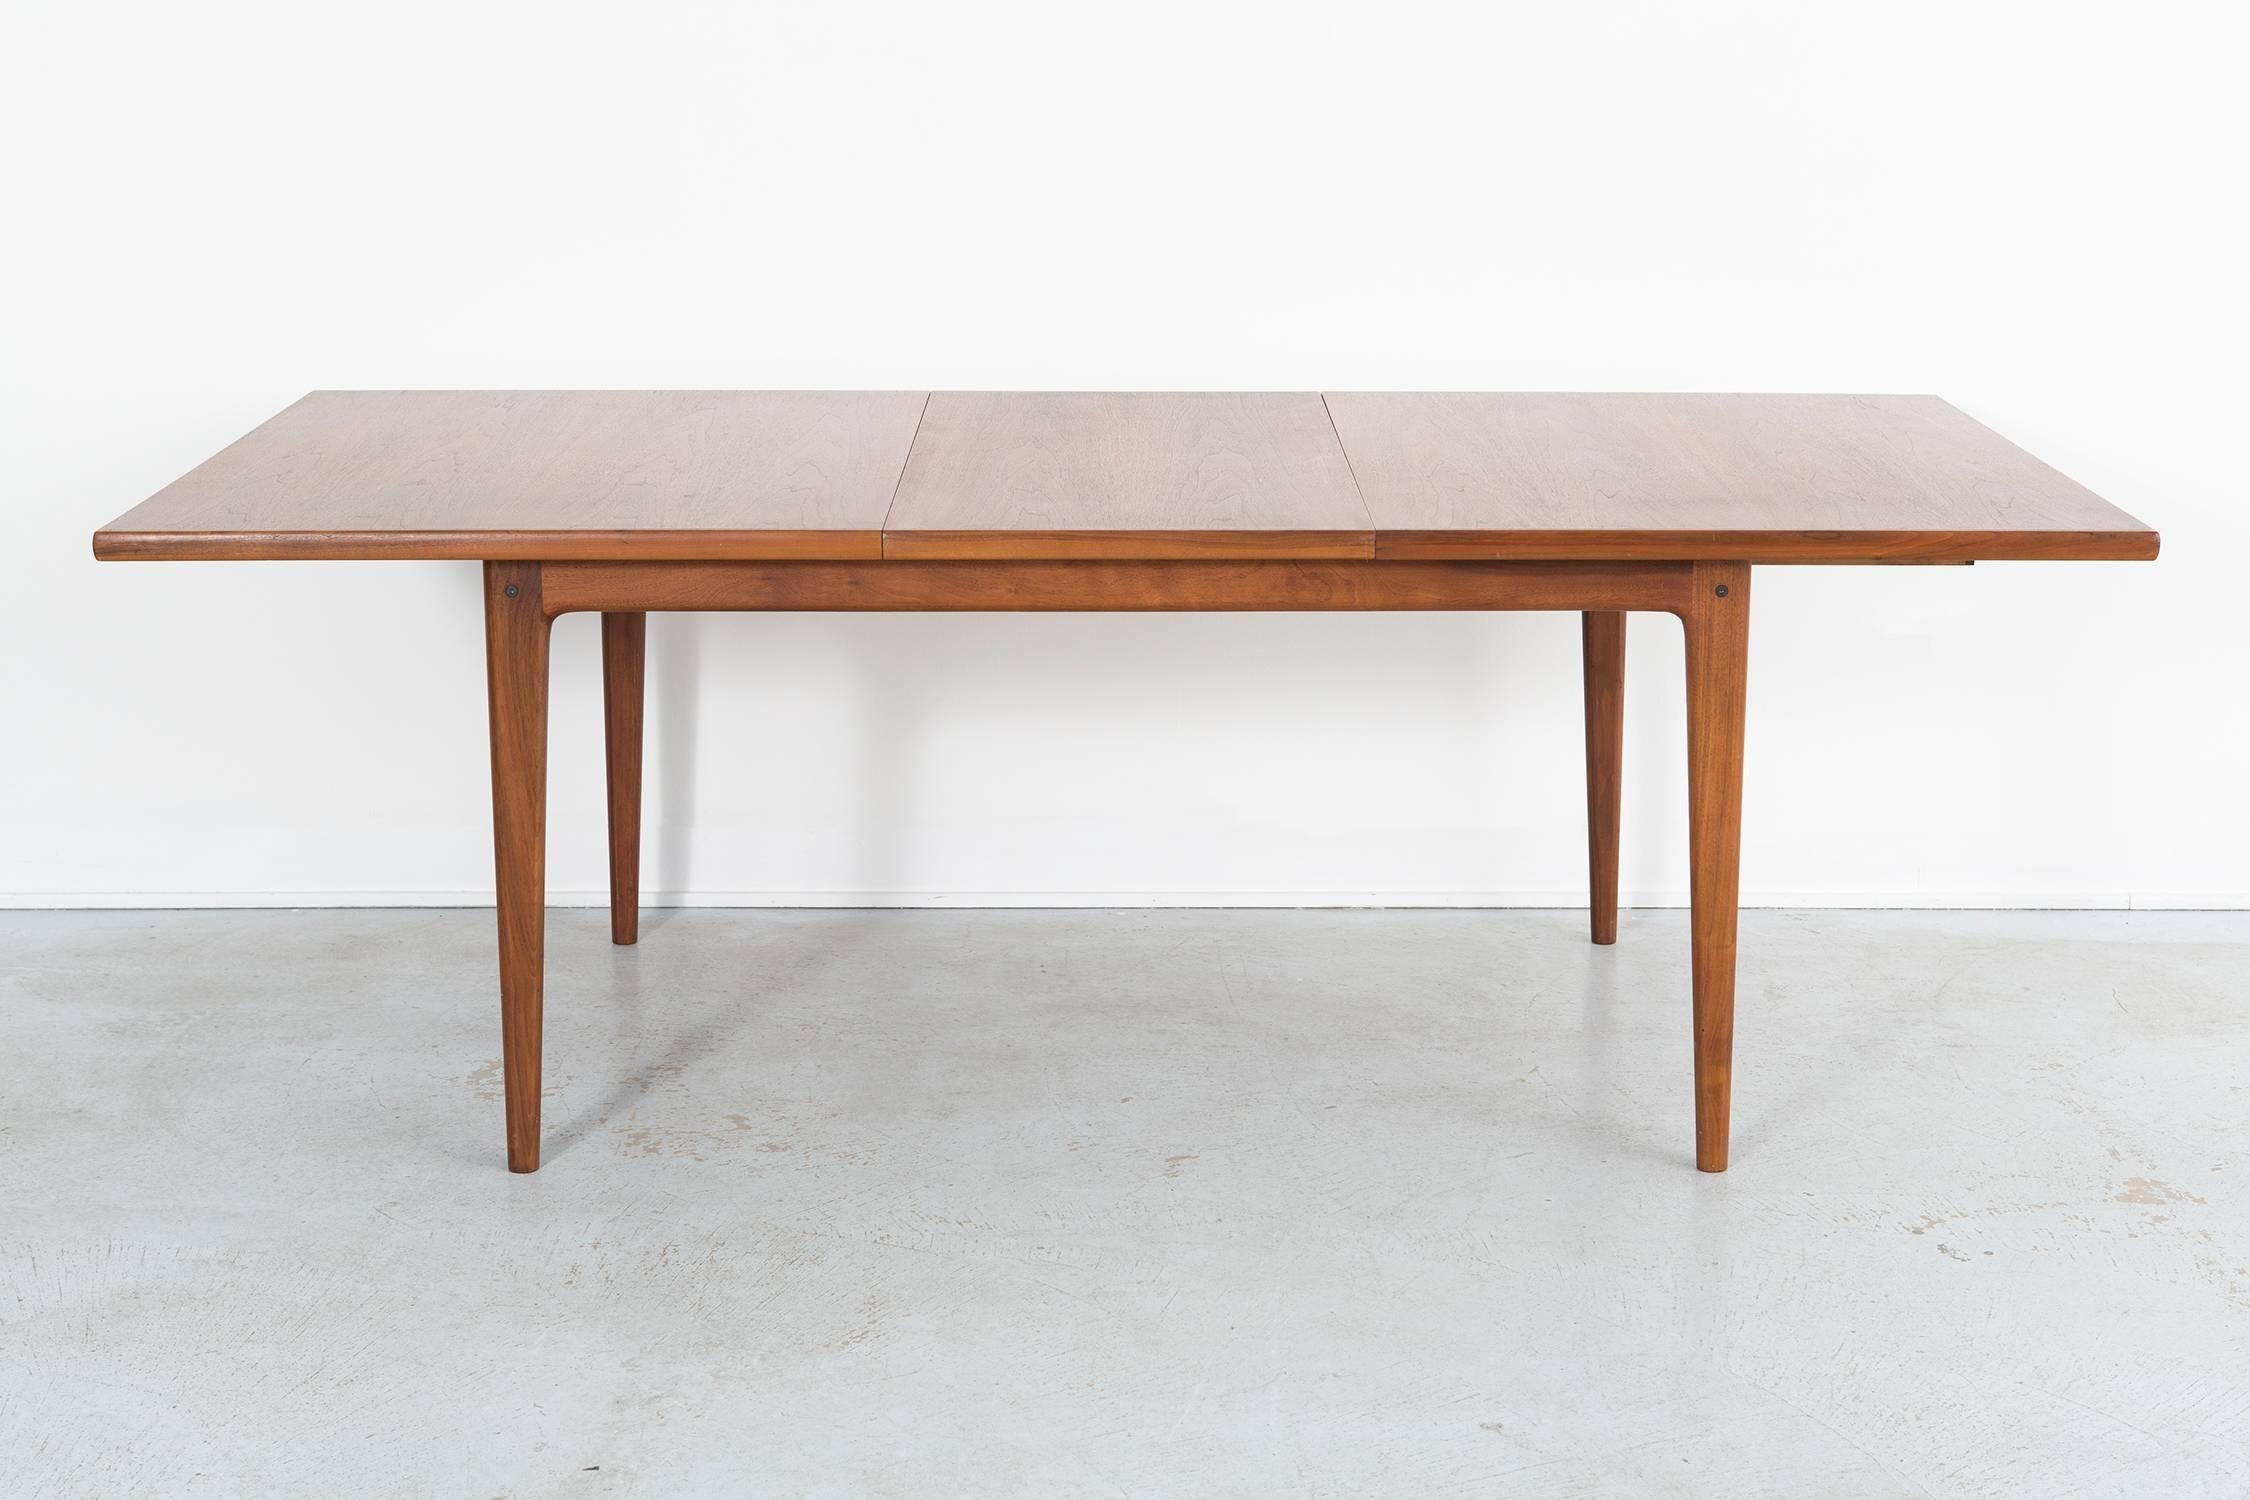 dining table

by Dux

Sweden, c 1960s

teak, includes two leaves + seats up to 10 people

not extended 28 5/16” h x 62 ⅞” w x 39 ¼” d

extended with one leaf 28 5/16” h x 82 ¼” w x 39 ¼” d

extended with two leaves 28 5/16” h x 102 ⅜” w x 39 ¼”